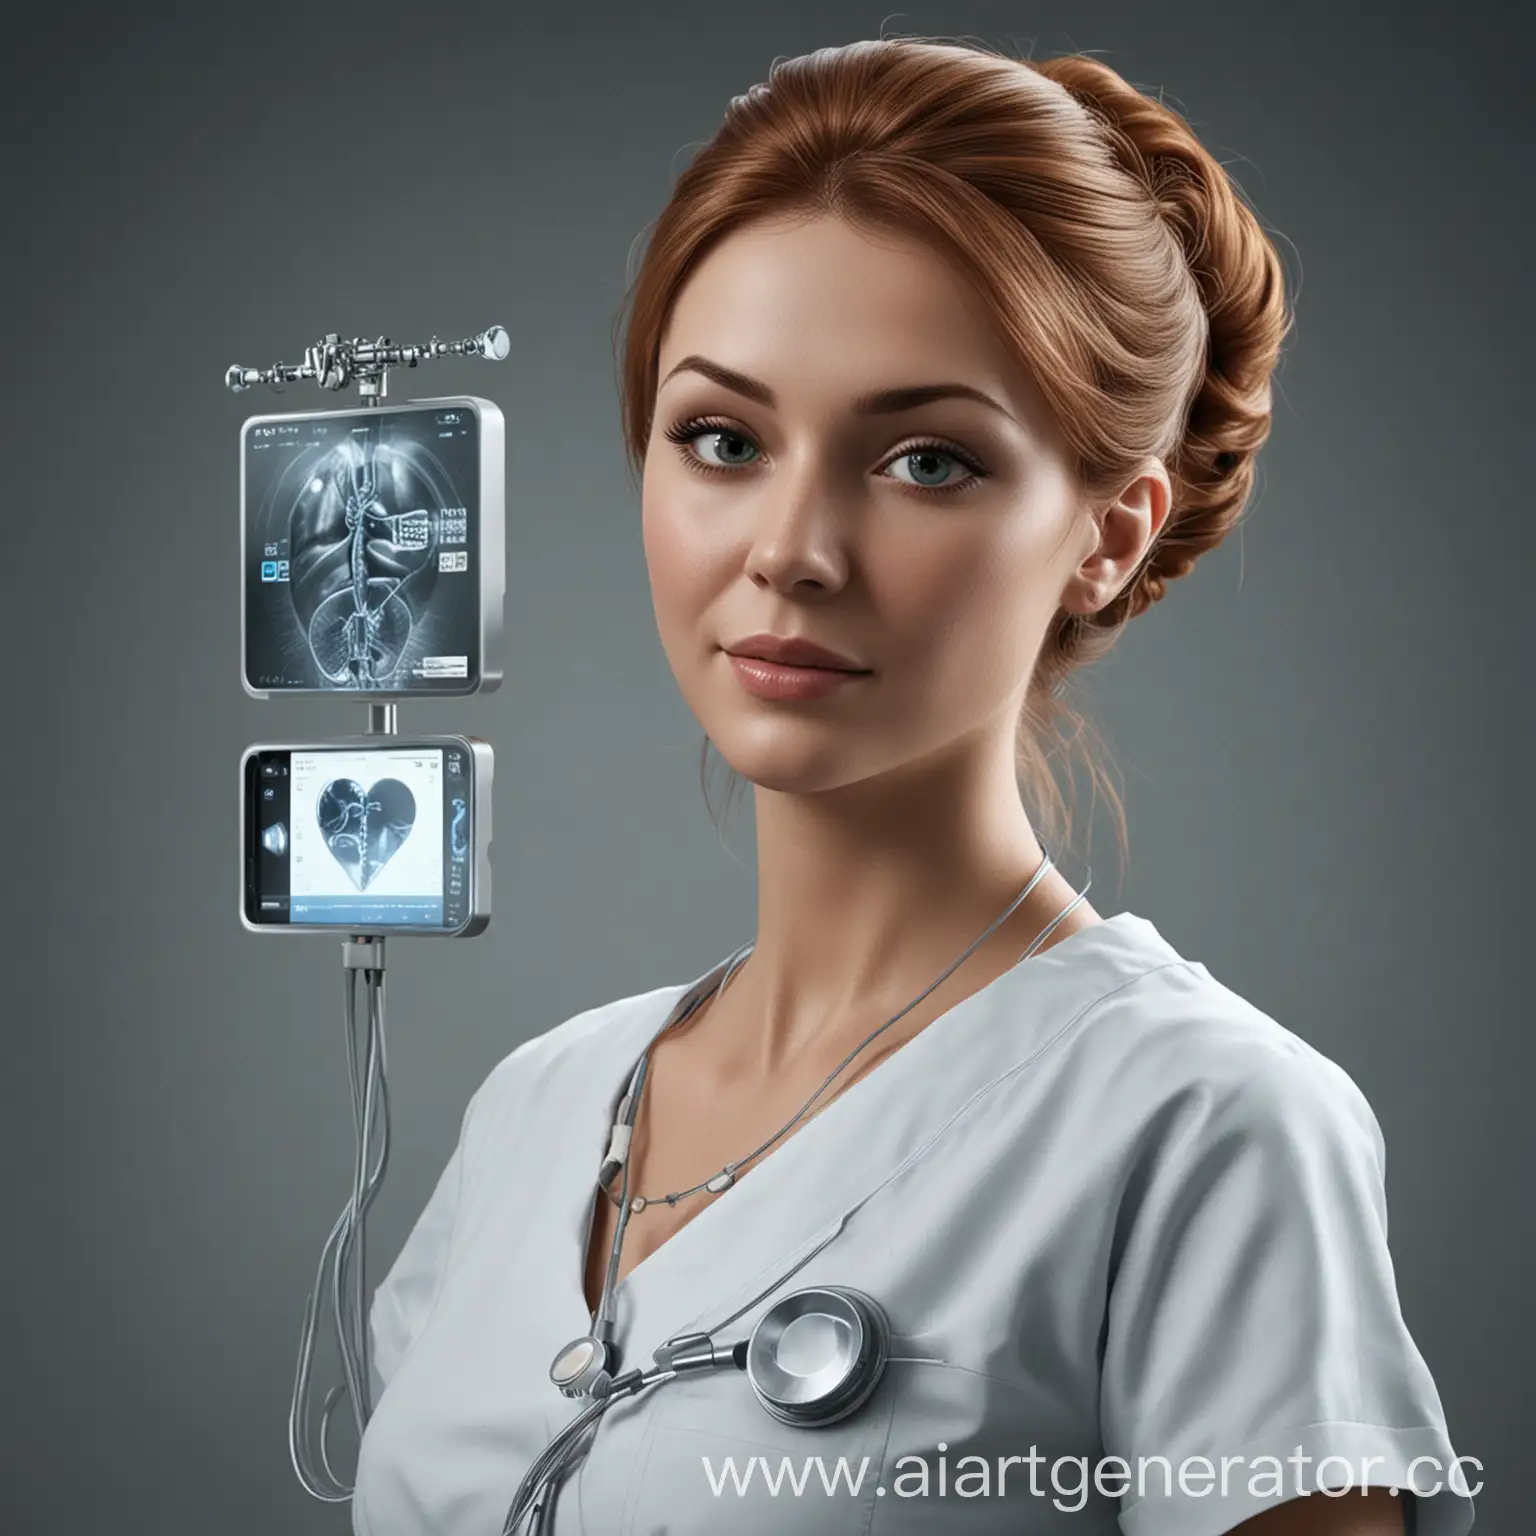 an innovative, Hyper-realistic, Futuristic, 3D image about Technological innovation in nursing and its influence on the quality of Healthcare